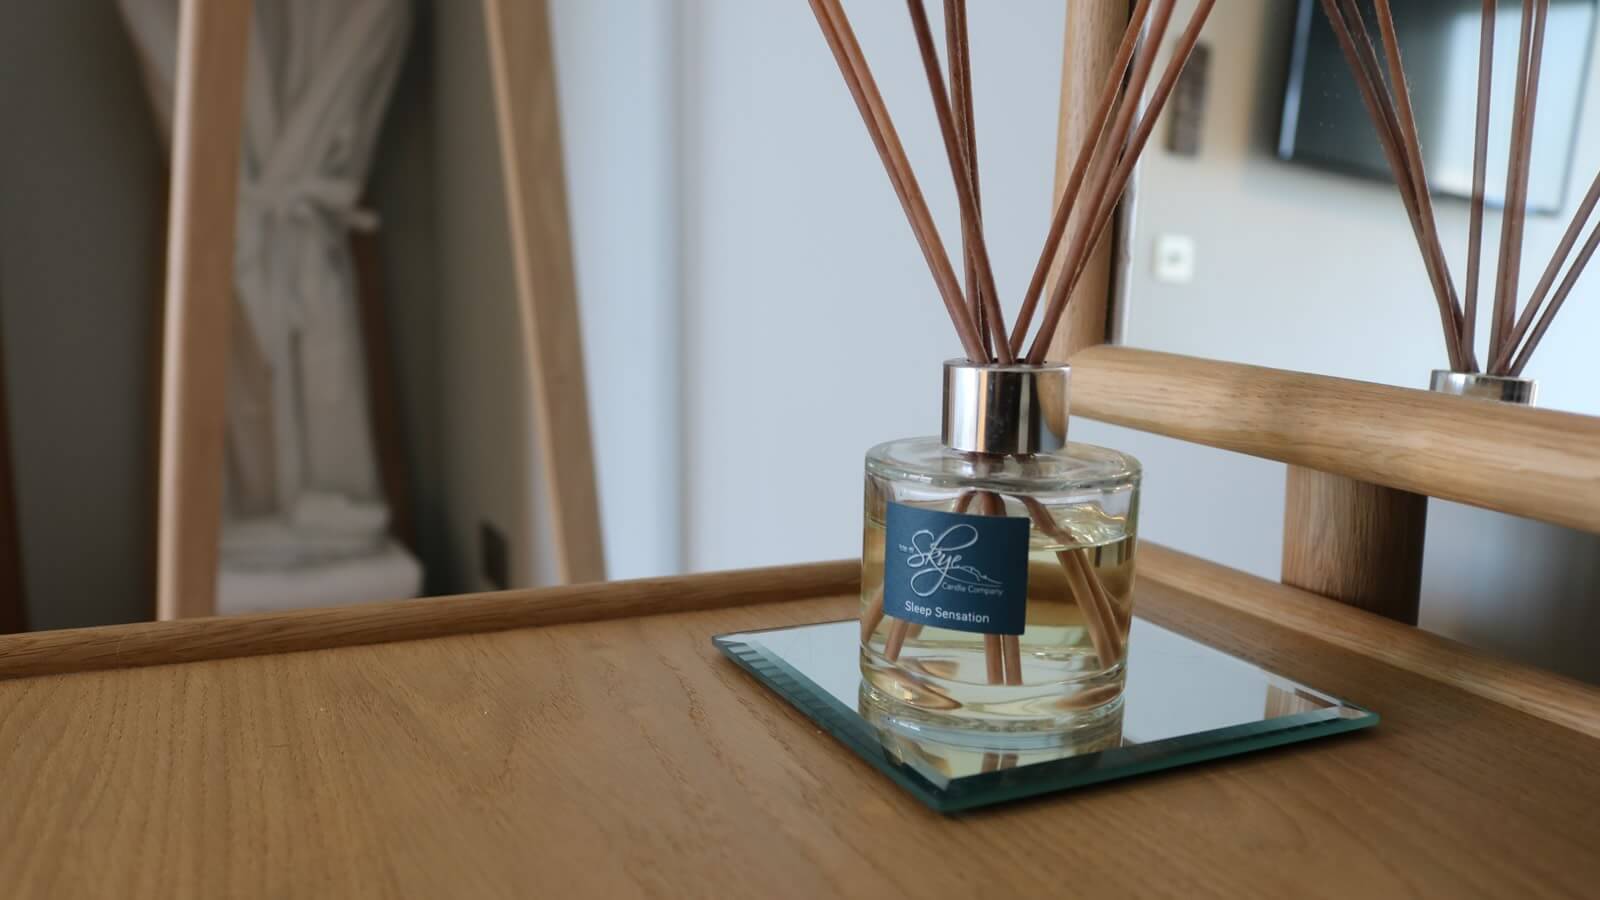 Skye Candle Company room scent diffuser